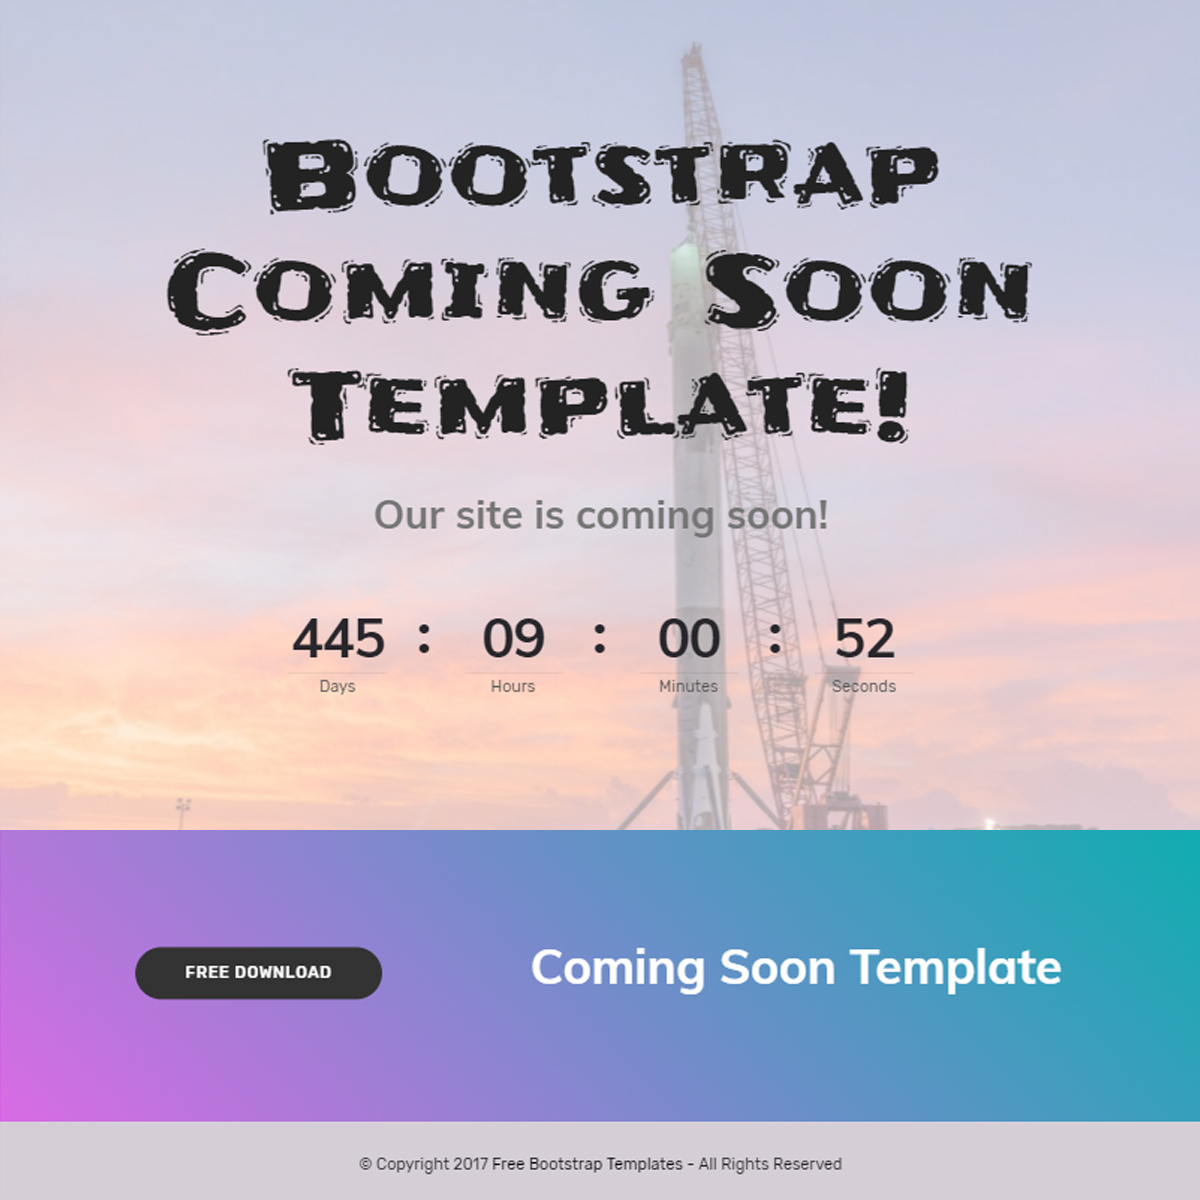 Free Bootstrap Coming Soon Templates